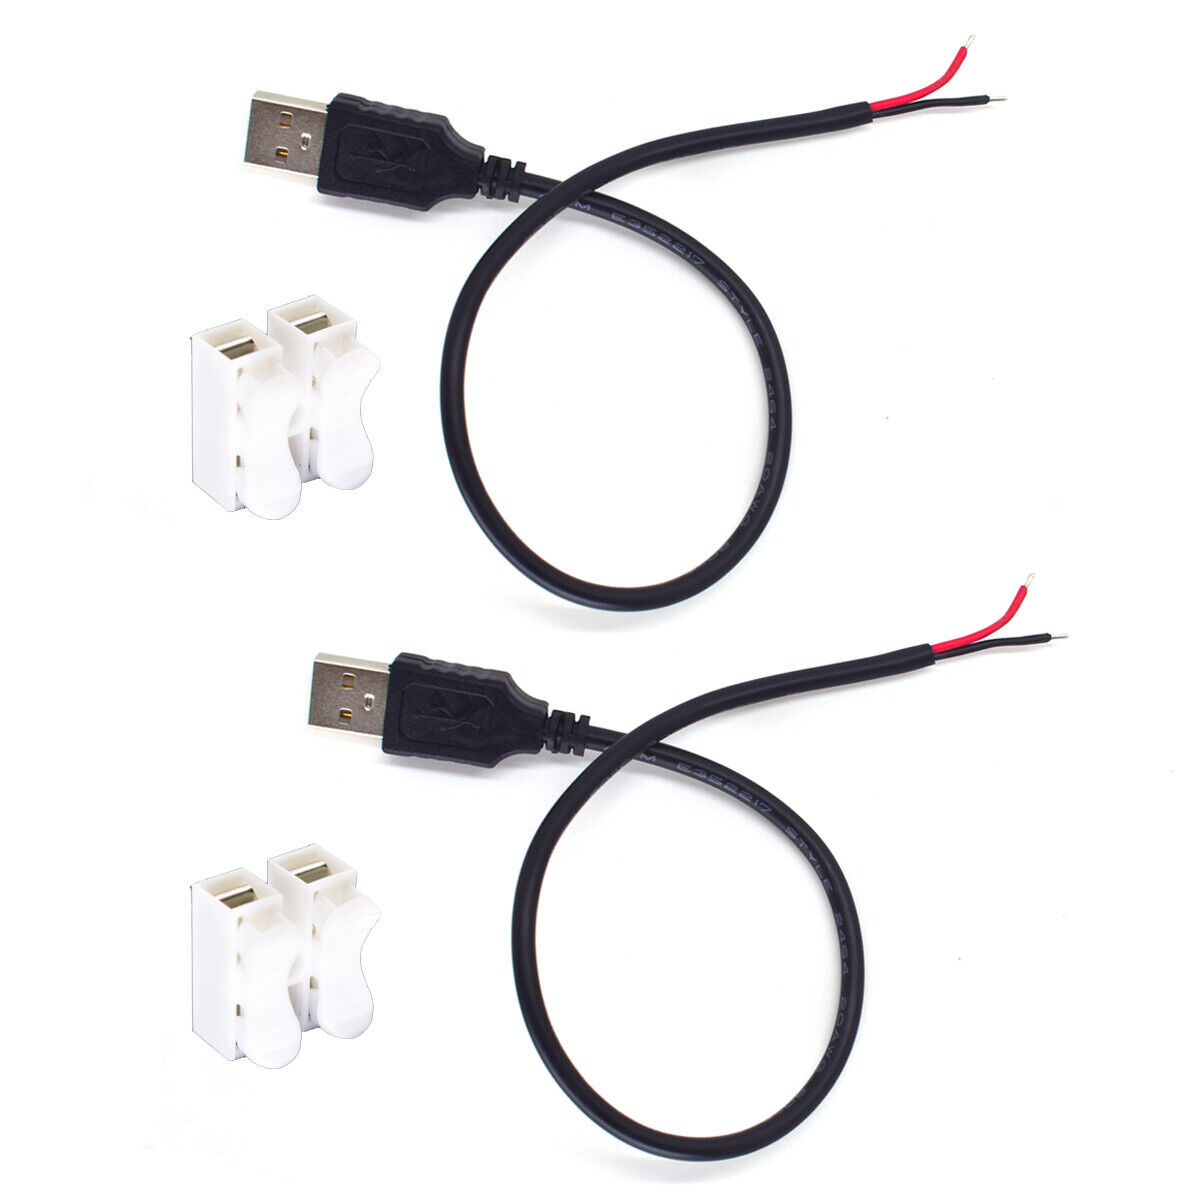 2pcs 0.3M/1FT USB Male to Bare Wire Cable 20AWG 5A USB2.0 2pin DIY Pigtail Cable